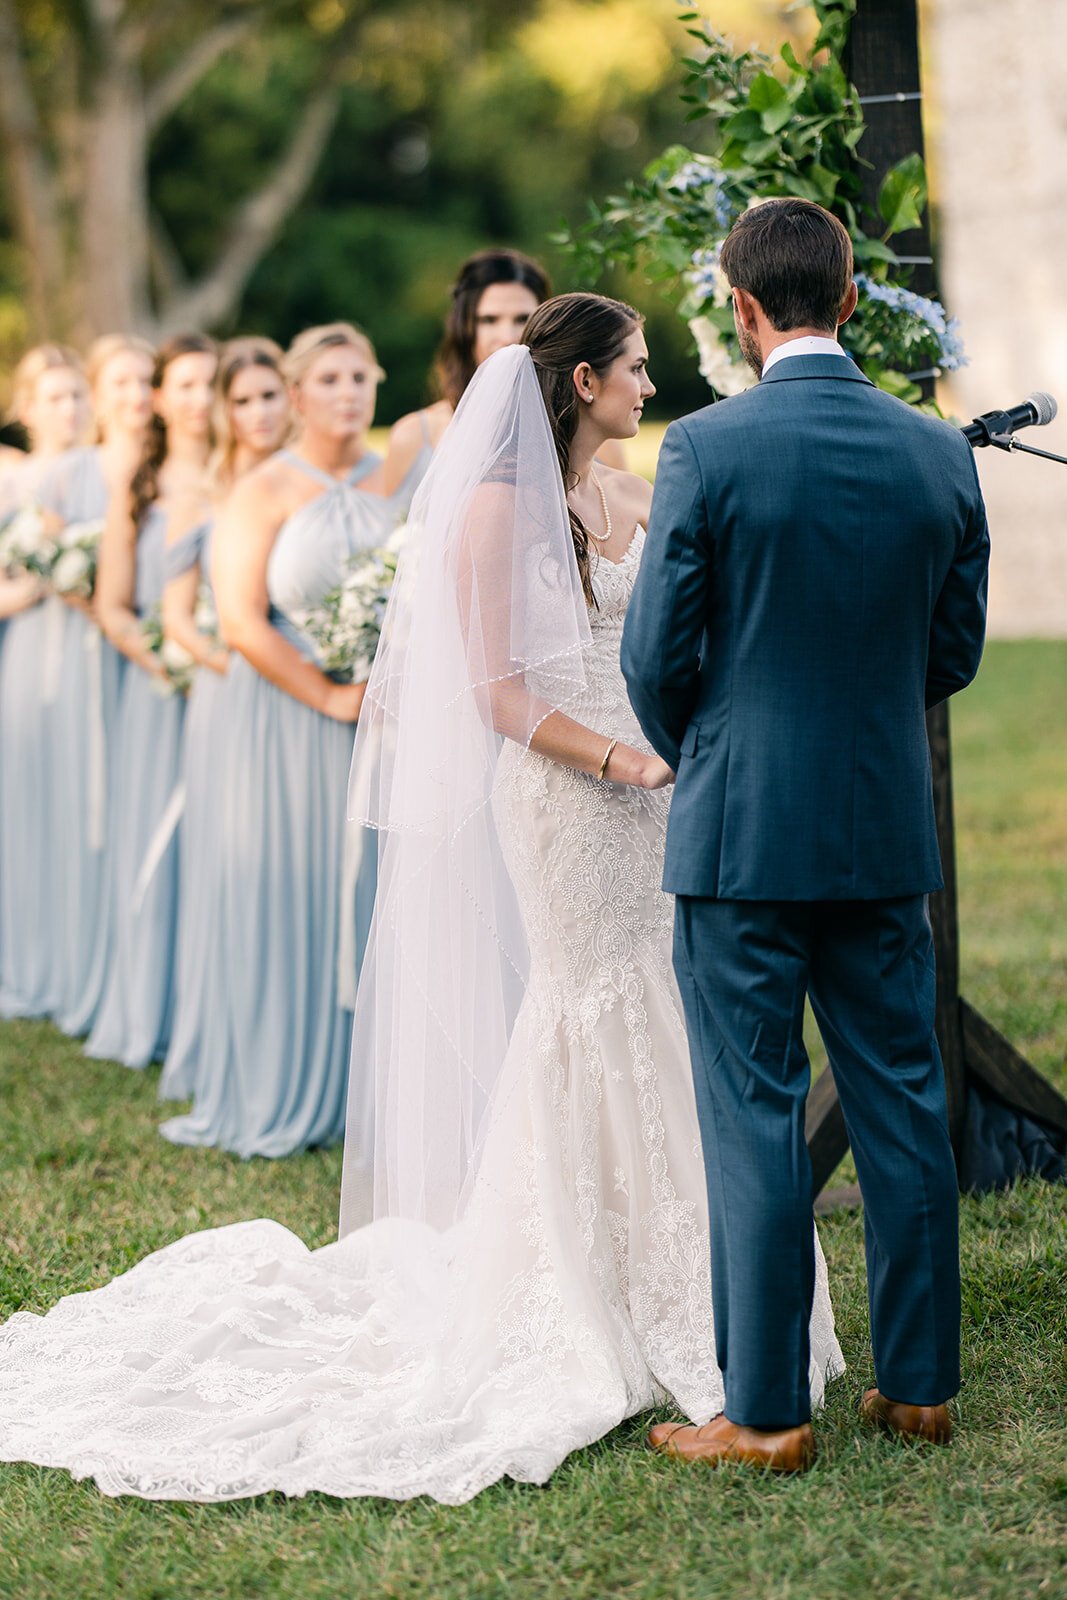 ivory-and-beau-bride-down-for-the-gown-liz-real-bride-blog-southern-bride-maggie-sottero-wedding-dress-bridal-gown-wedding-gown-bridal-shop-bridal-boutique-bridal-shopping-bridal-style-bridal-inspo-savannah-georgia-431A1261.jpg